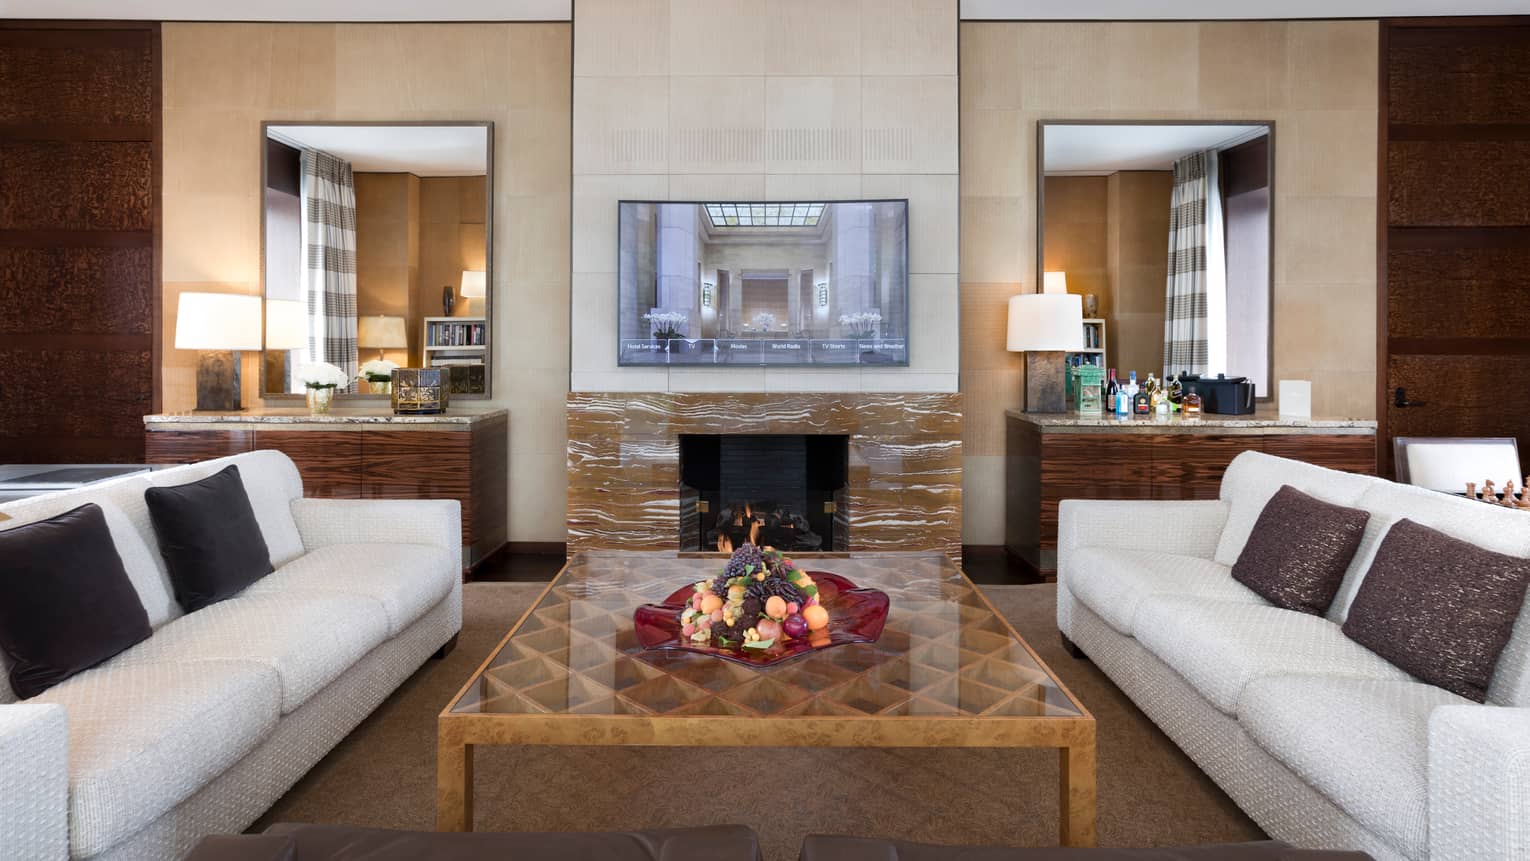 Presidential Suite white sofas around large table, wood-grain marble fireplace, TV on mantle